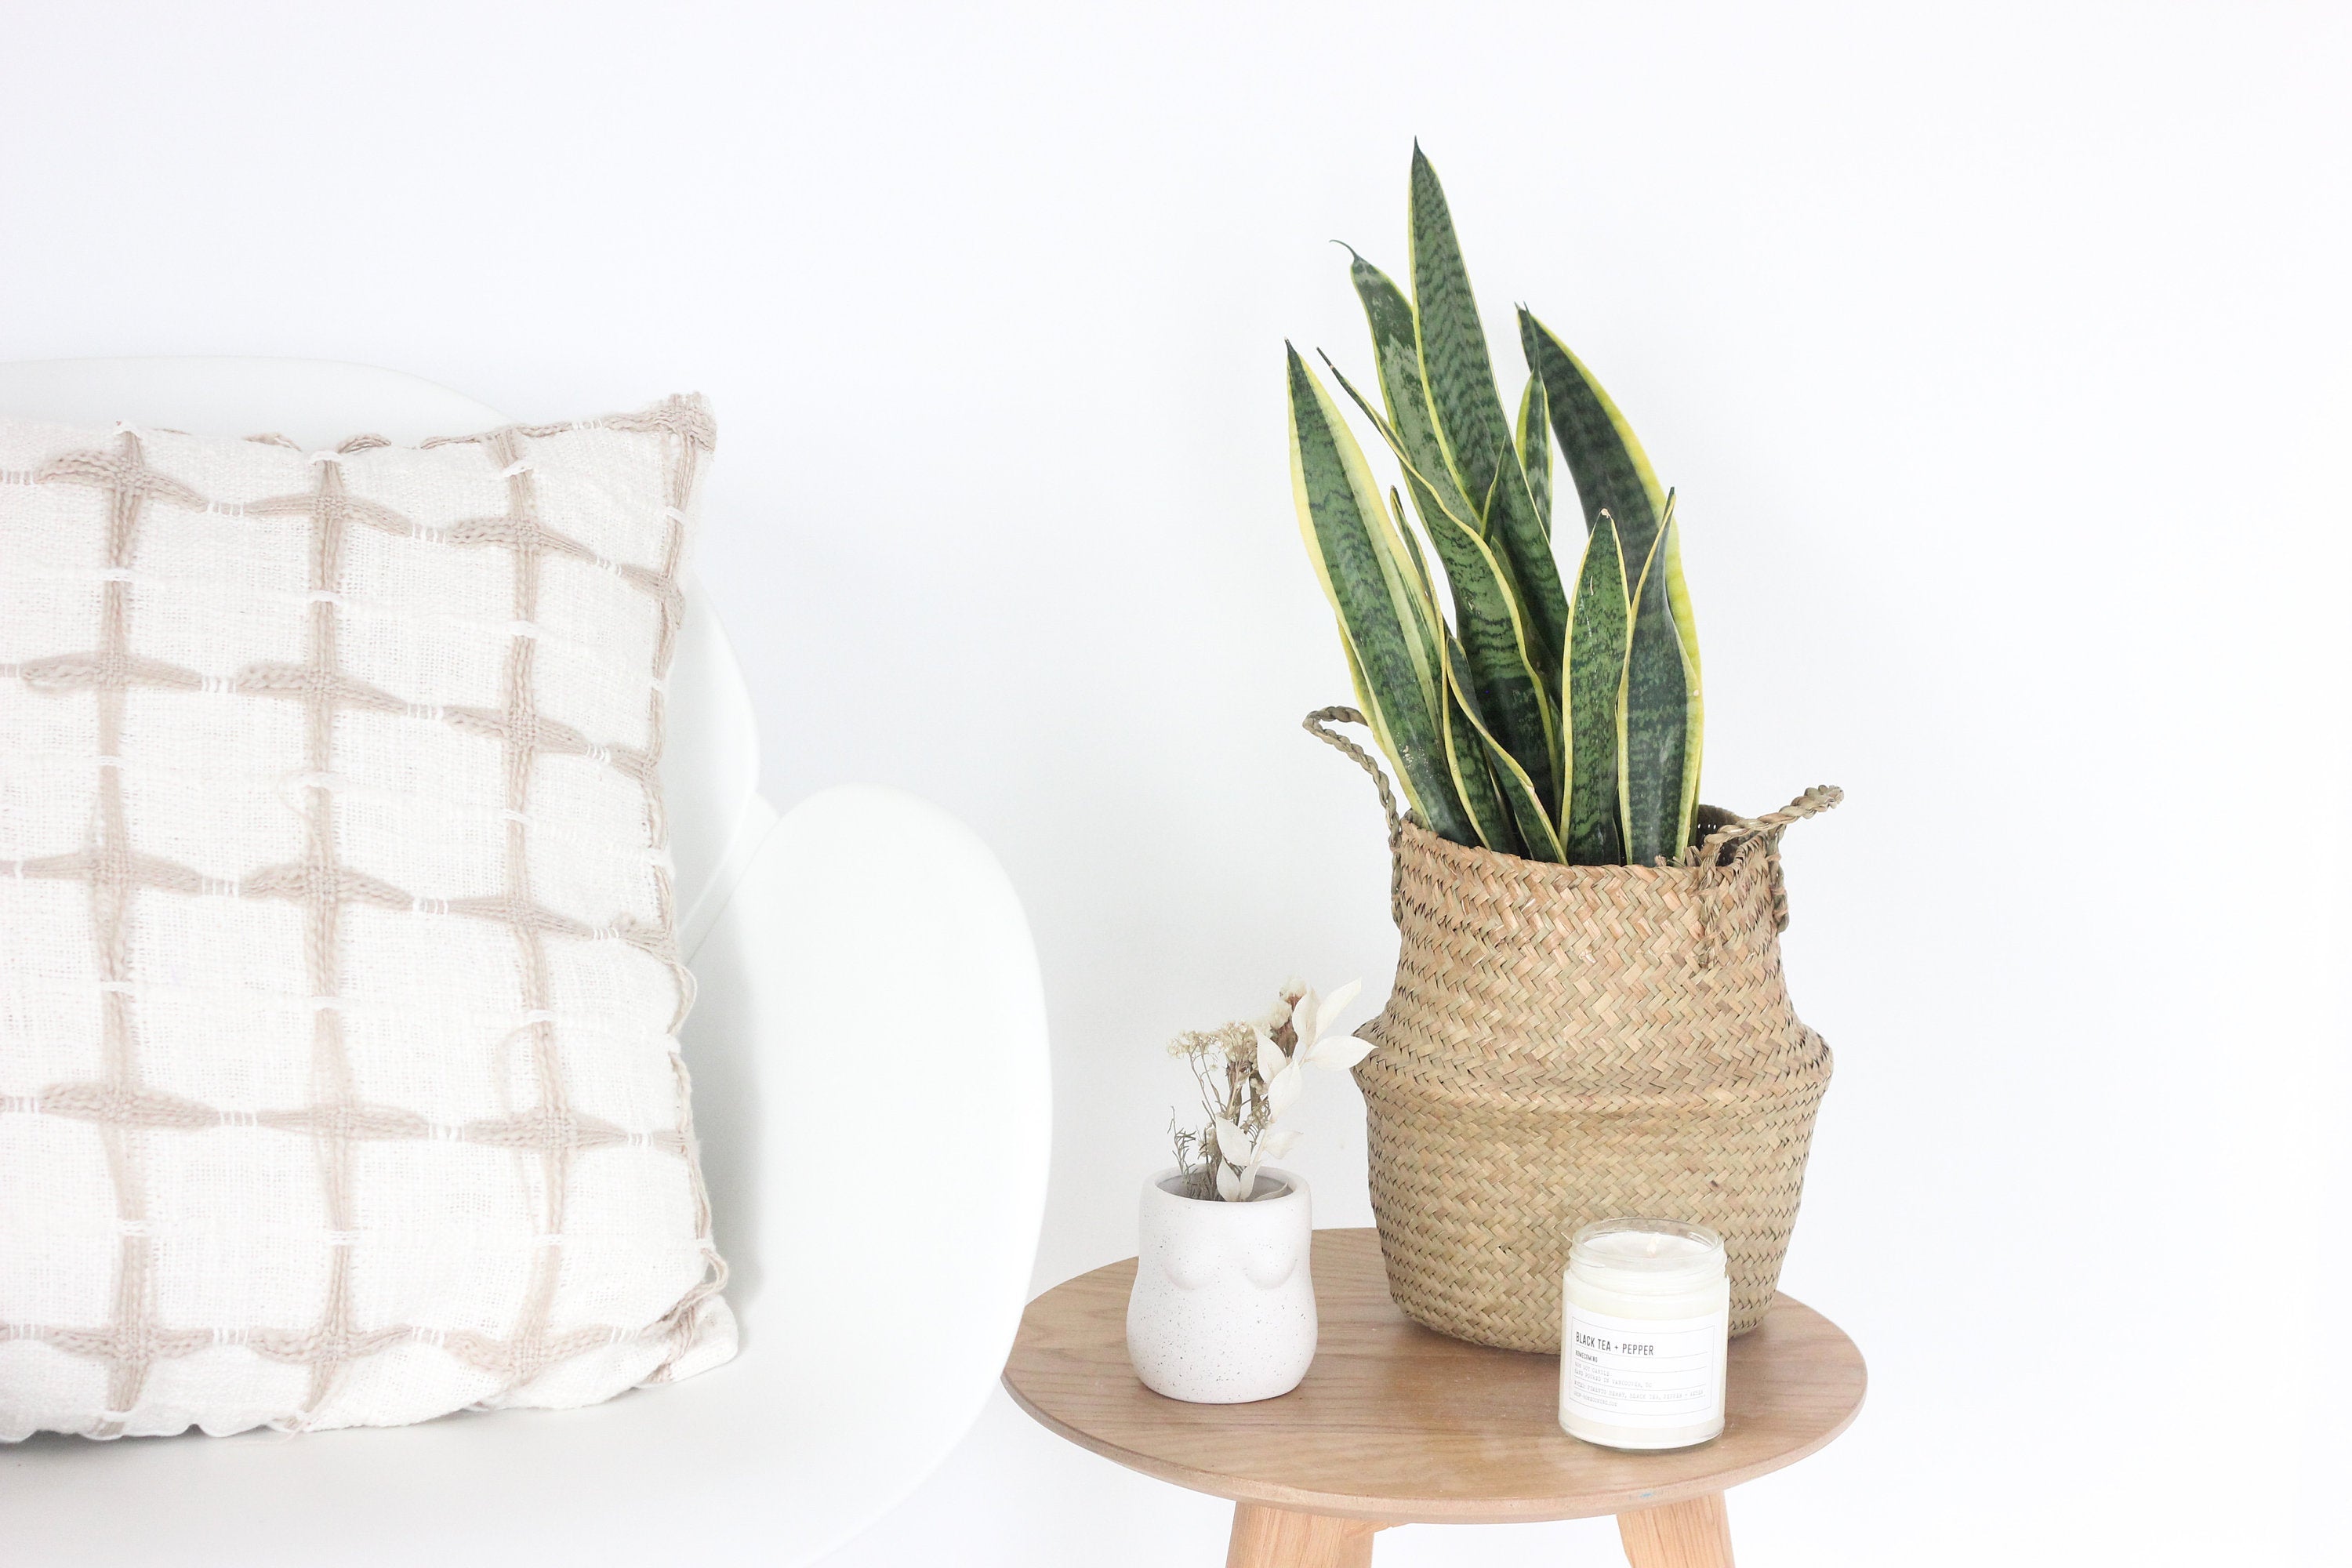 Woven Seagrass Belly Basket Planter